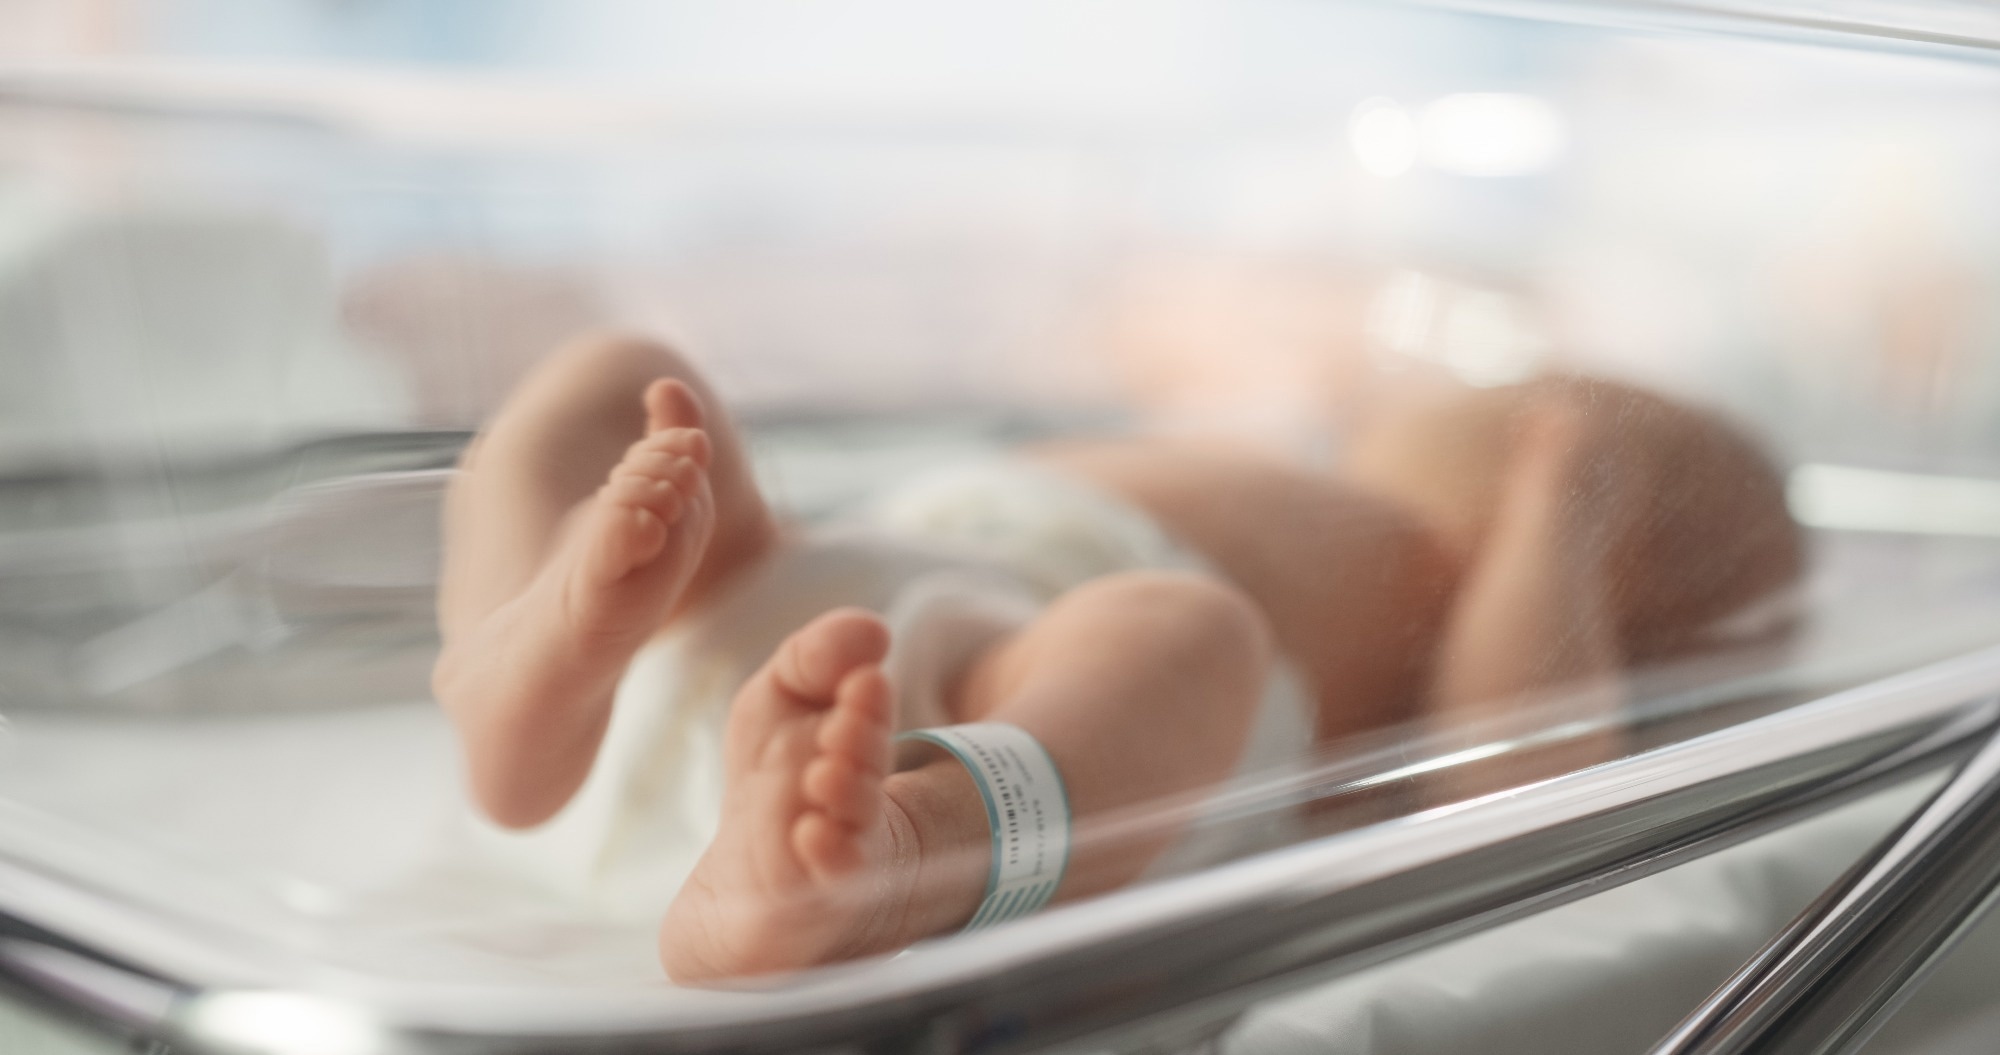 Study: SARS-CoV-2 followed up on COVID outcomes in uninfected newborn mother-infant pairs (COMP) study due to respiratory distress.  Image credit: Gorodenkoff / Shutterstock.com